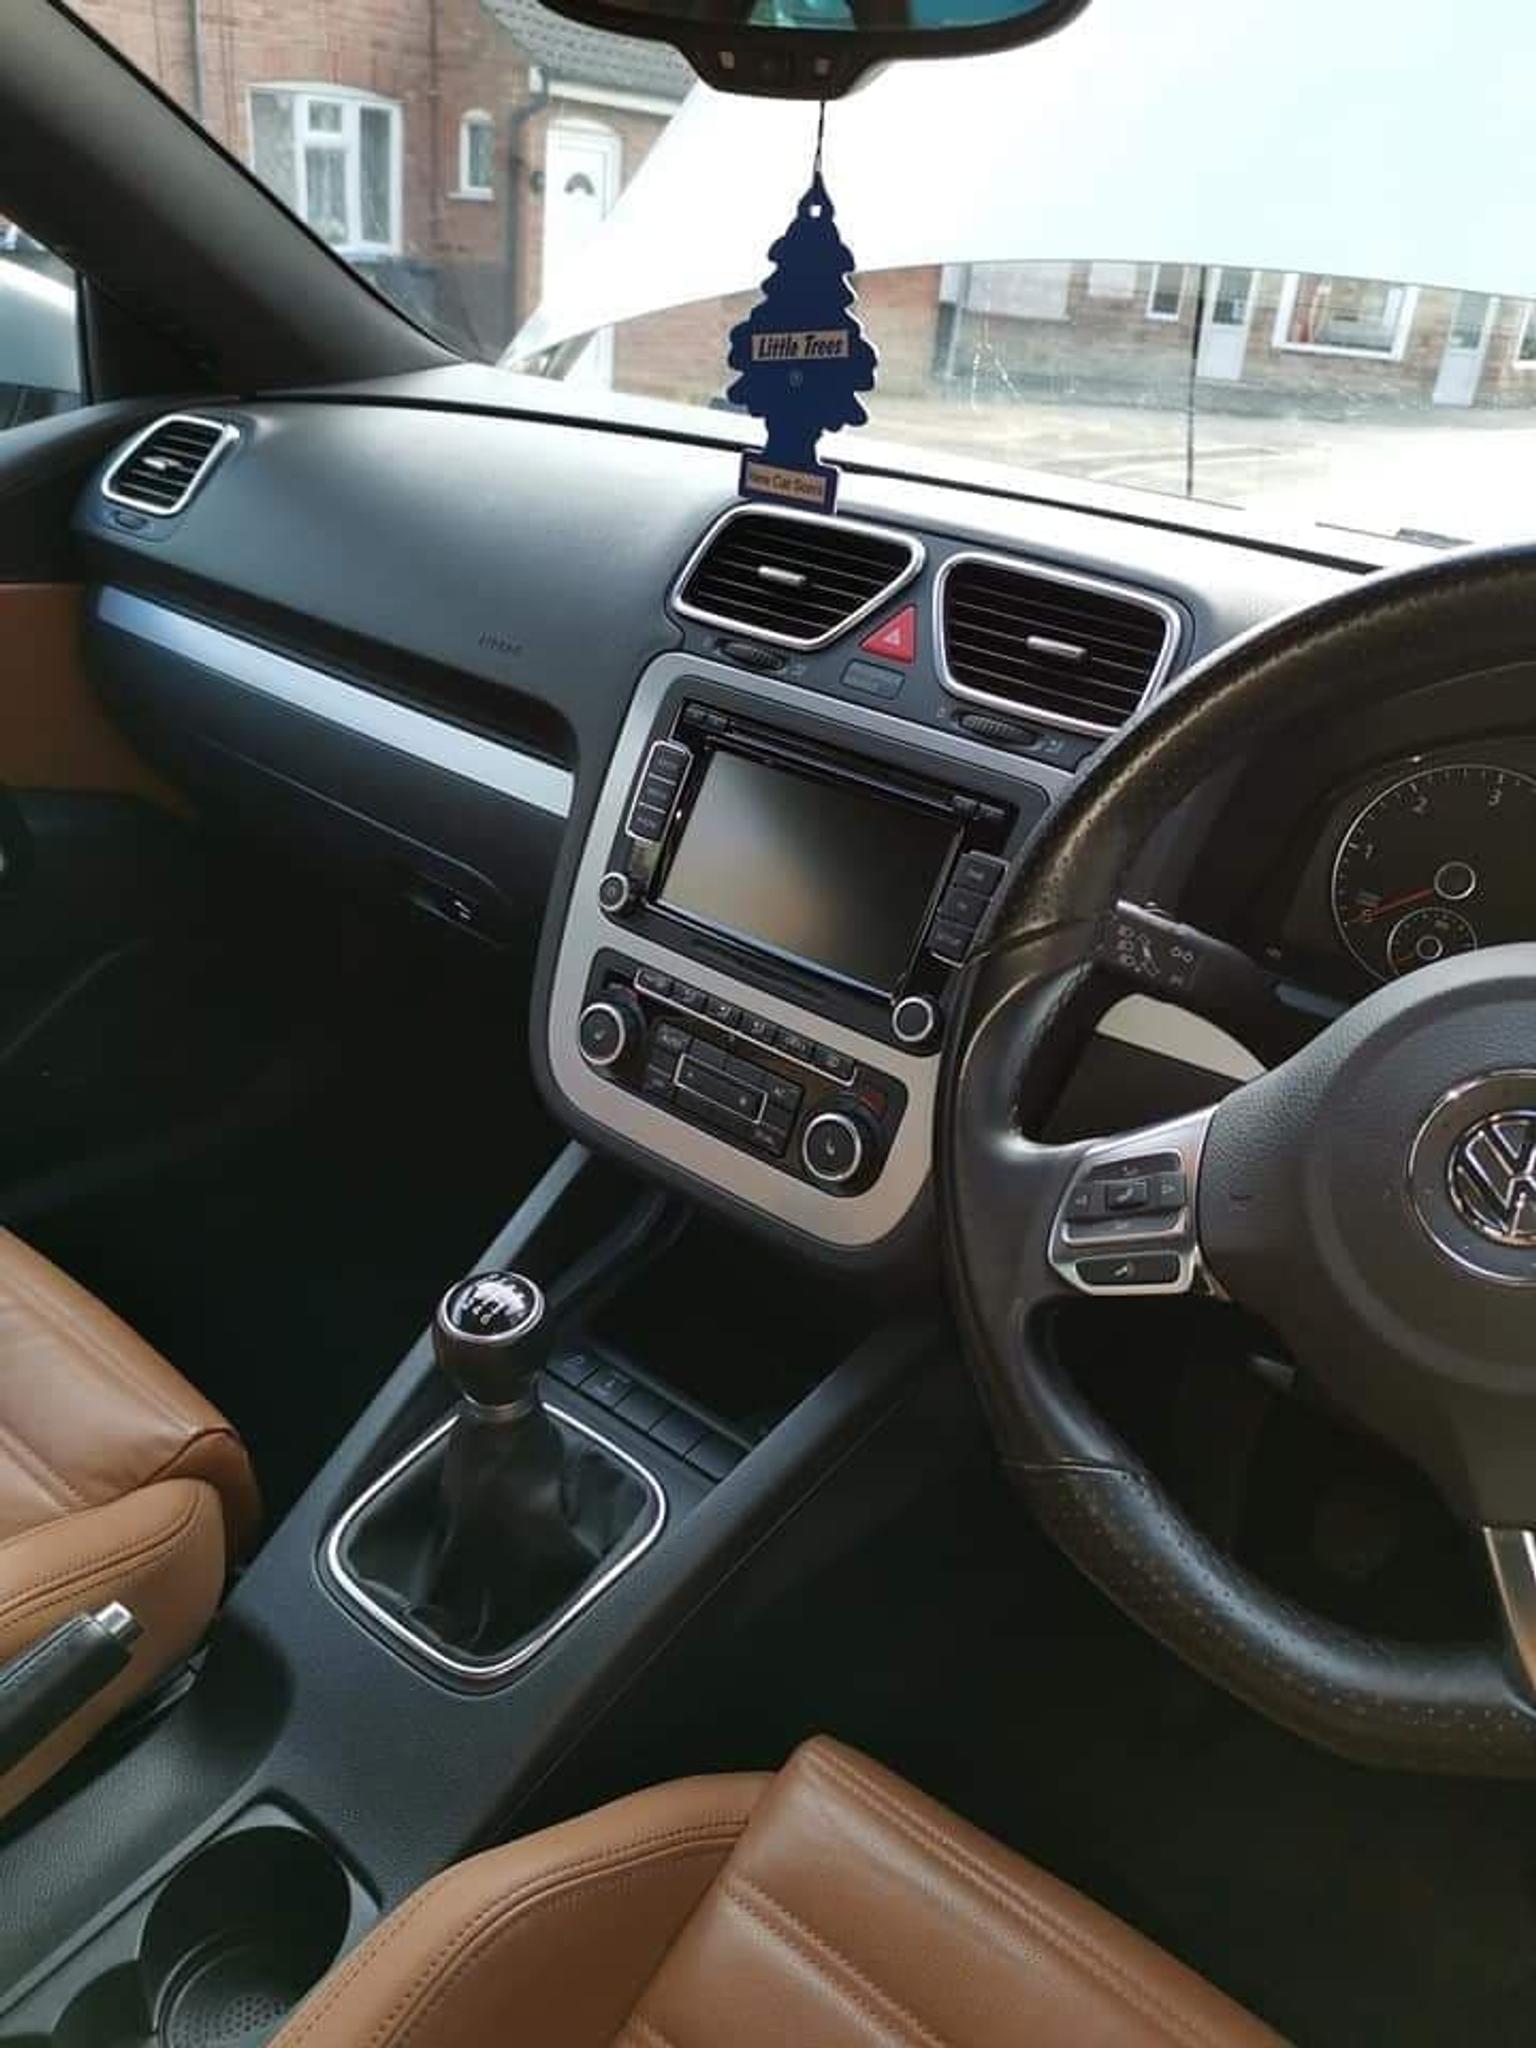 Vw Scirocco With Tan Leather Interior In Le9 Bosworth For